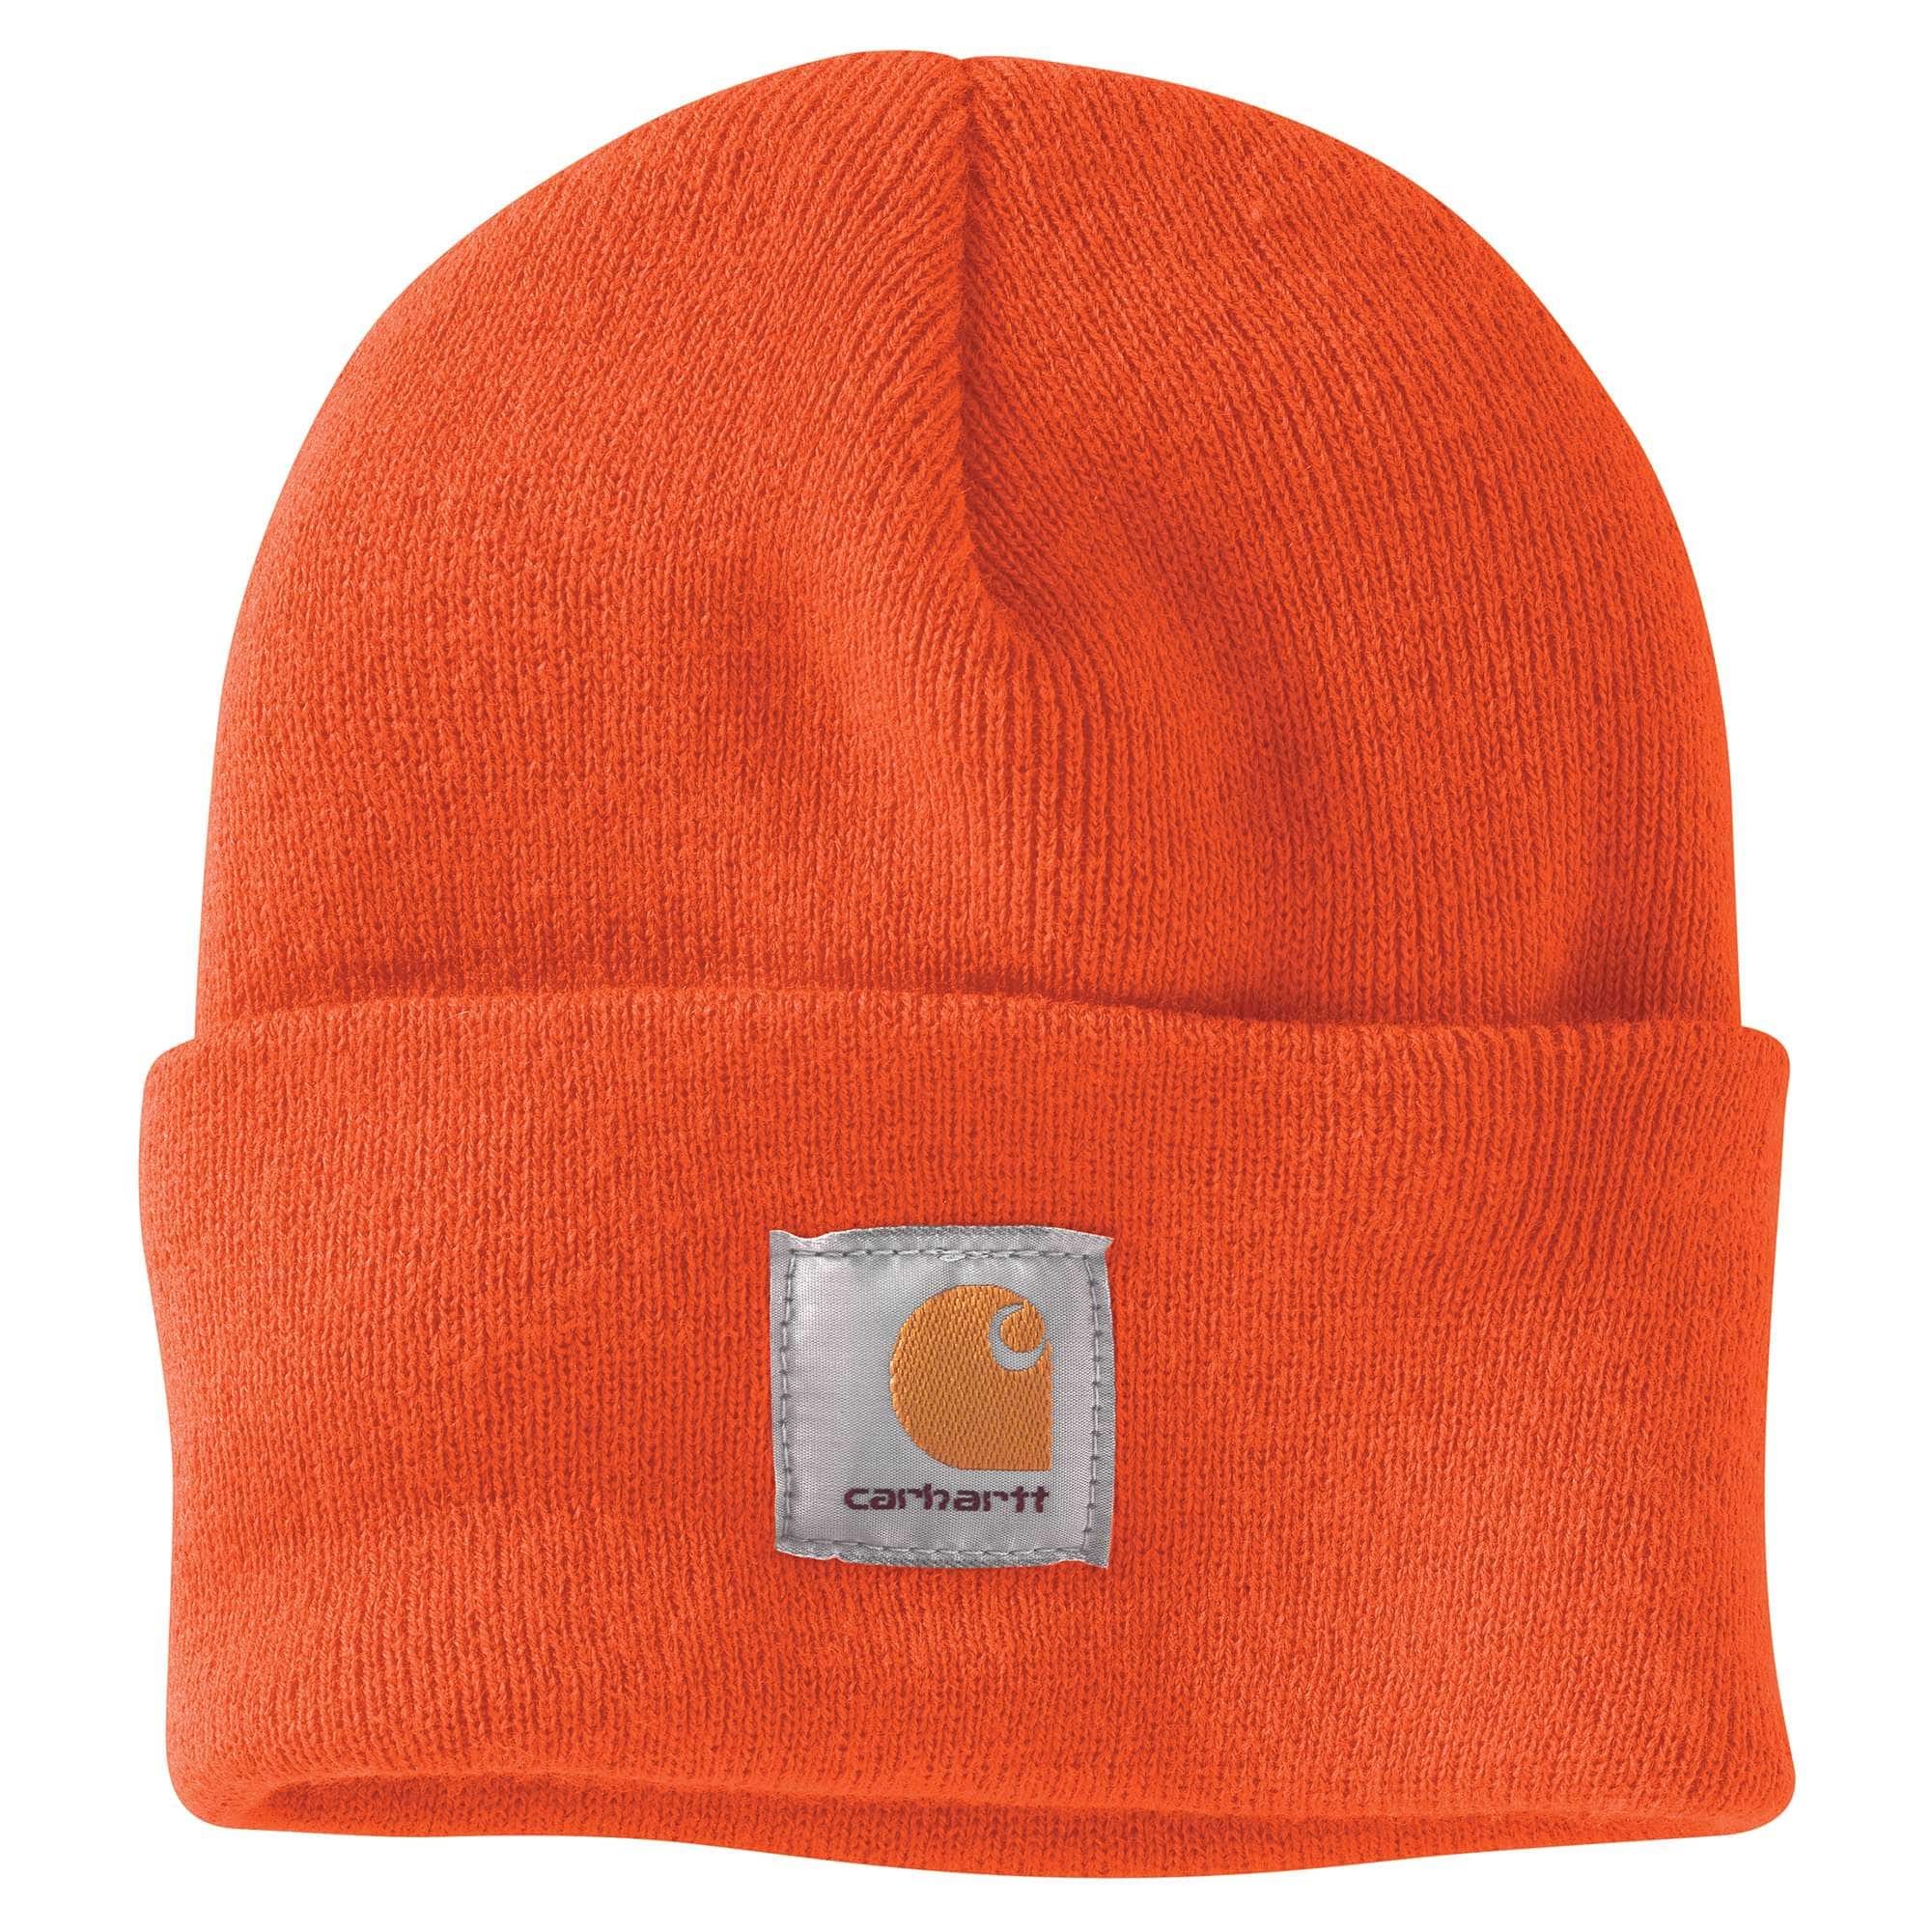 Beanies & Knit Hats - Outdoor, Work & Casual Beanies